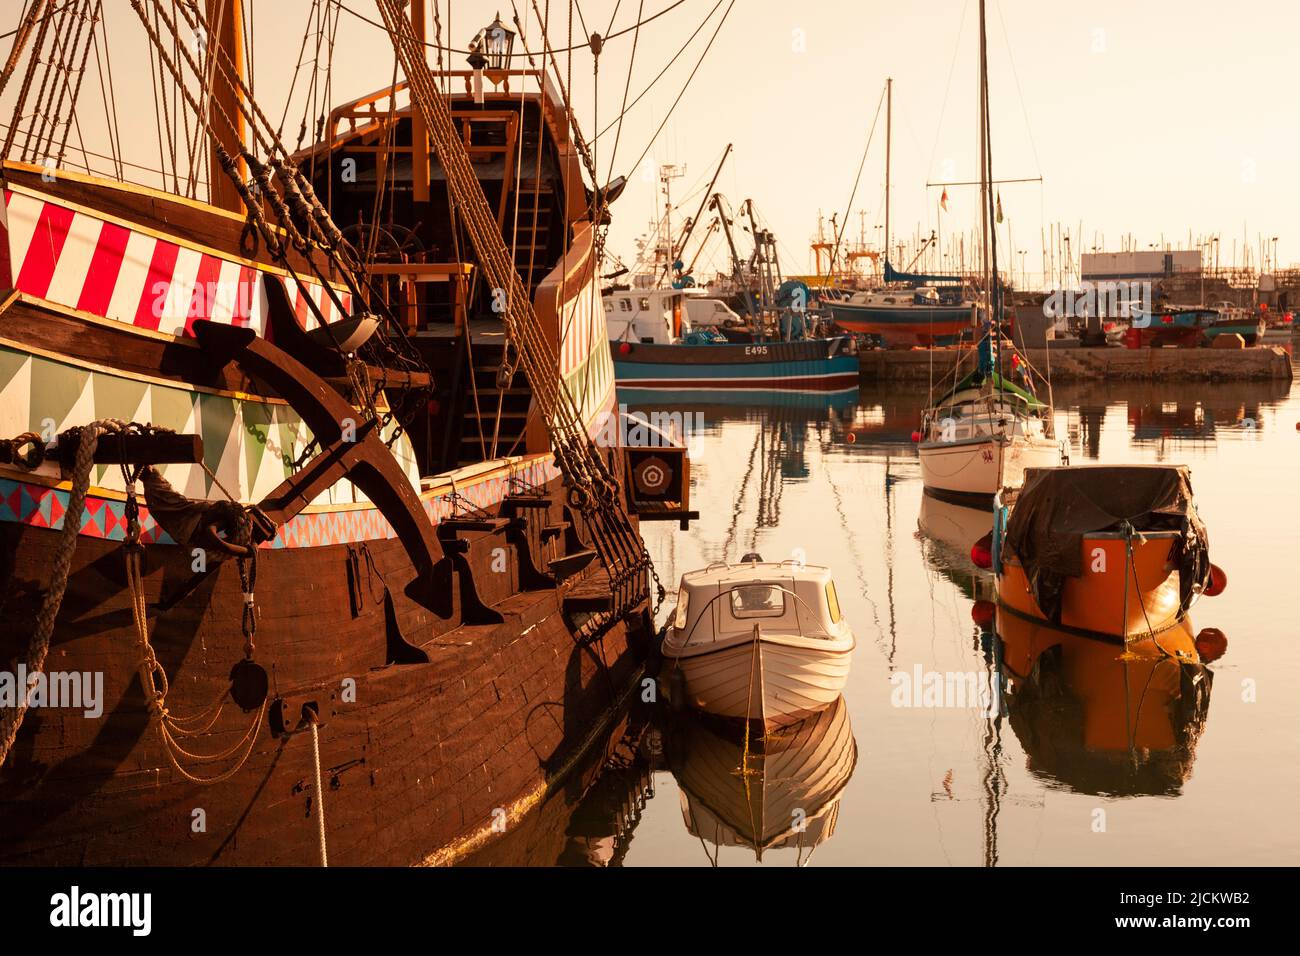 UK, England, Devon, Torbay, Brixham Harbour, Full size replica of the famous Golden Hind galleon with moored Boats at Dawn Stock Photo